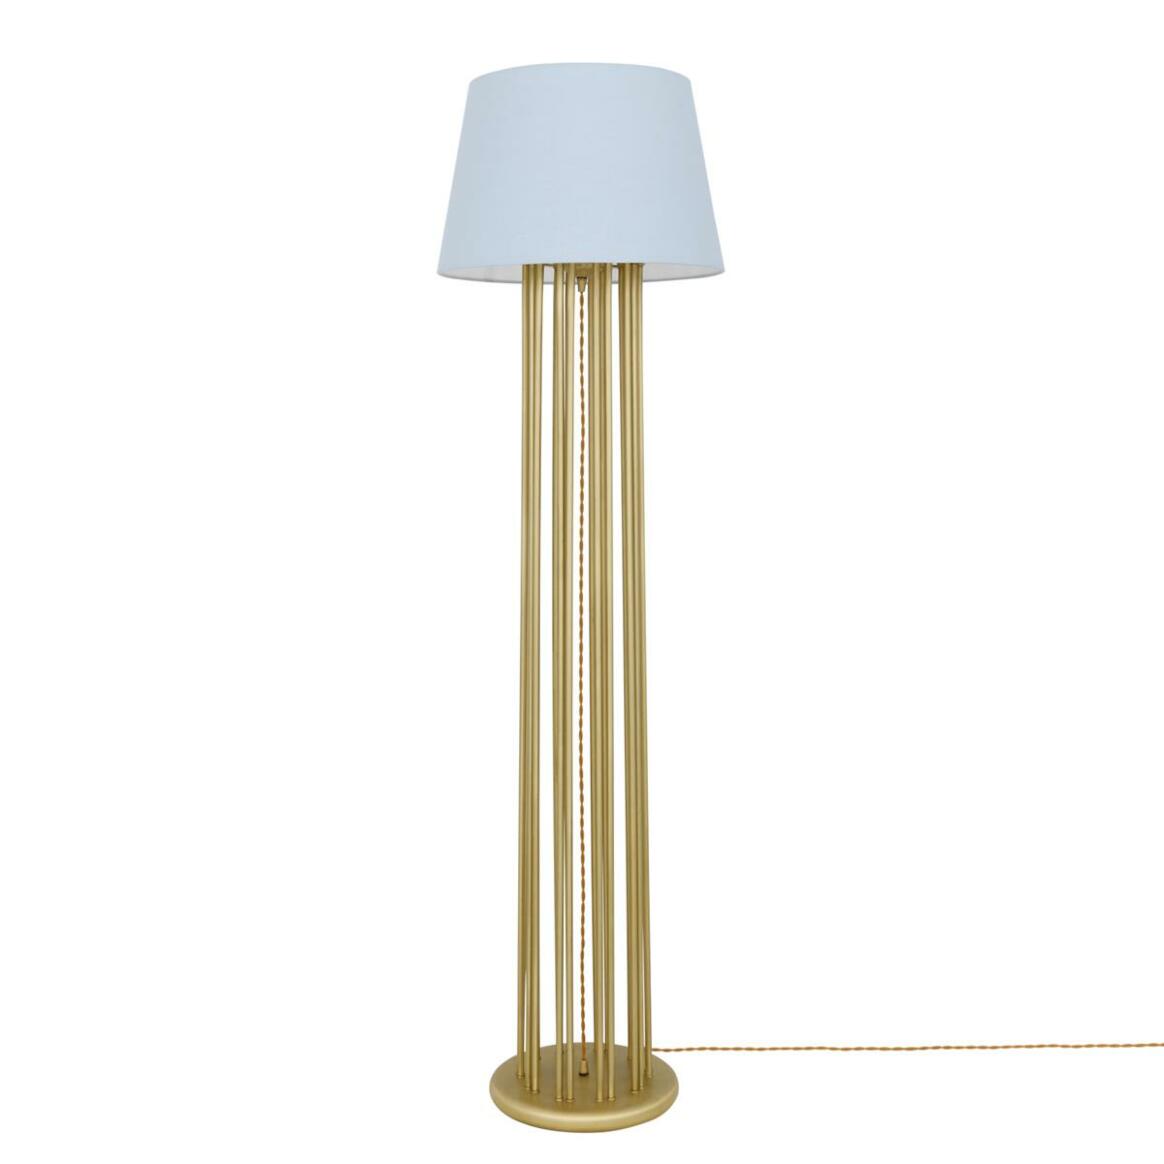 Banjul Contemporary Brass Floor Lamp with Fabric Shade main product image